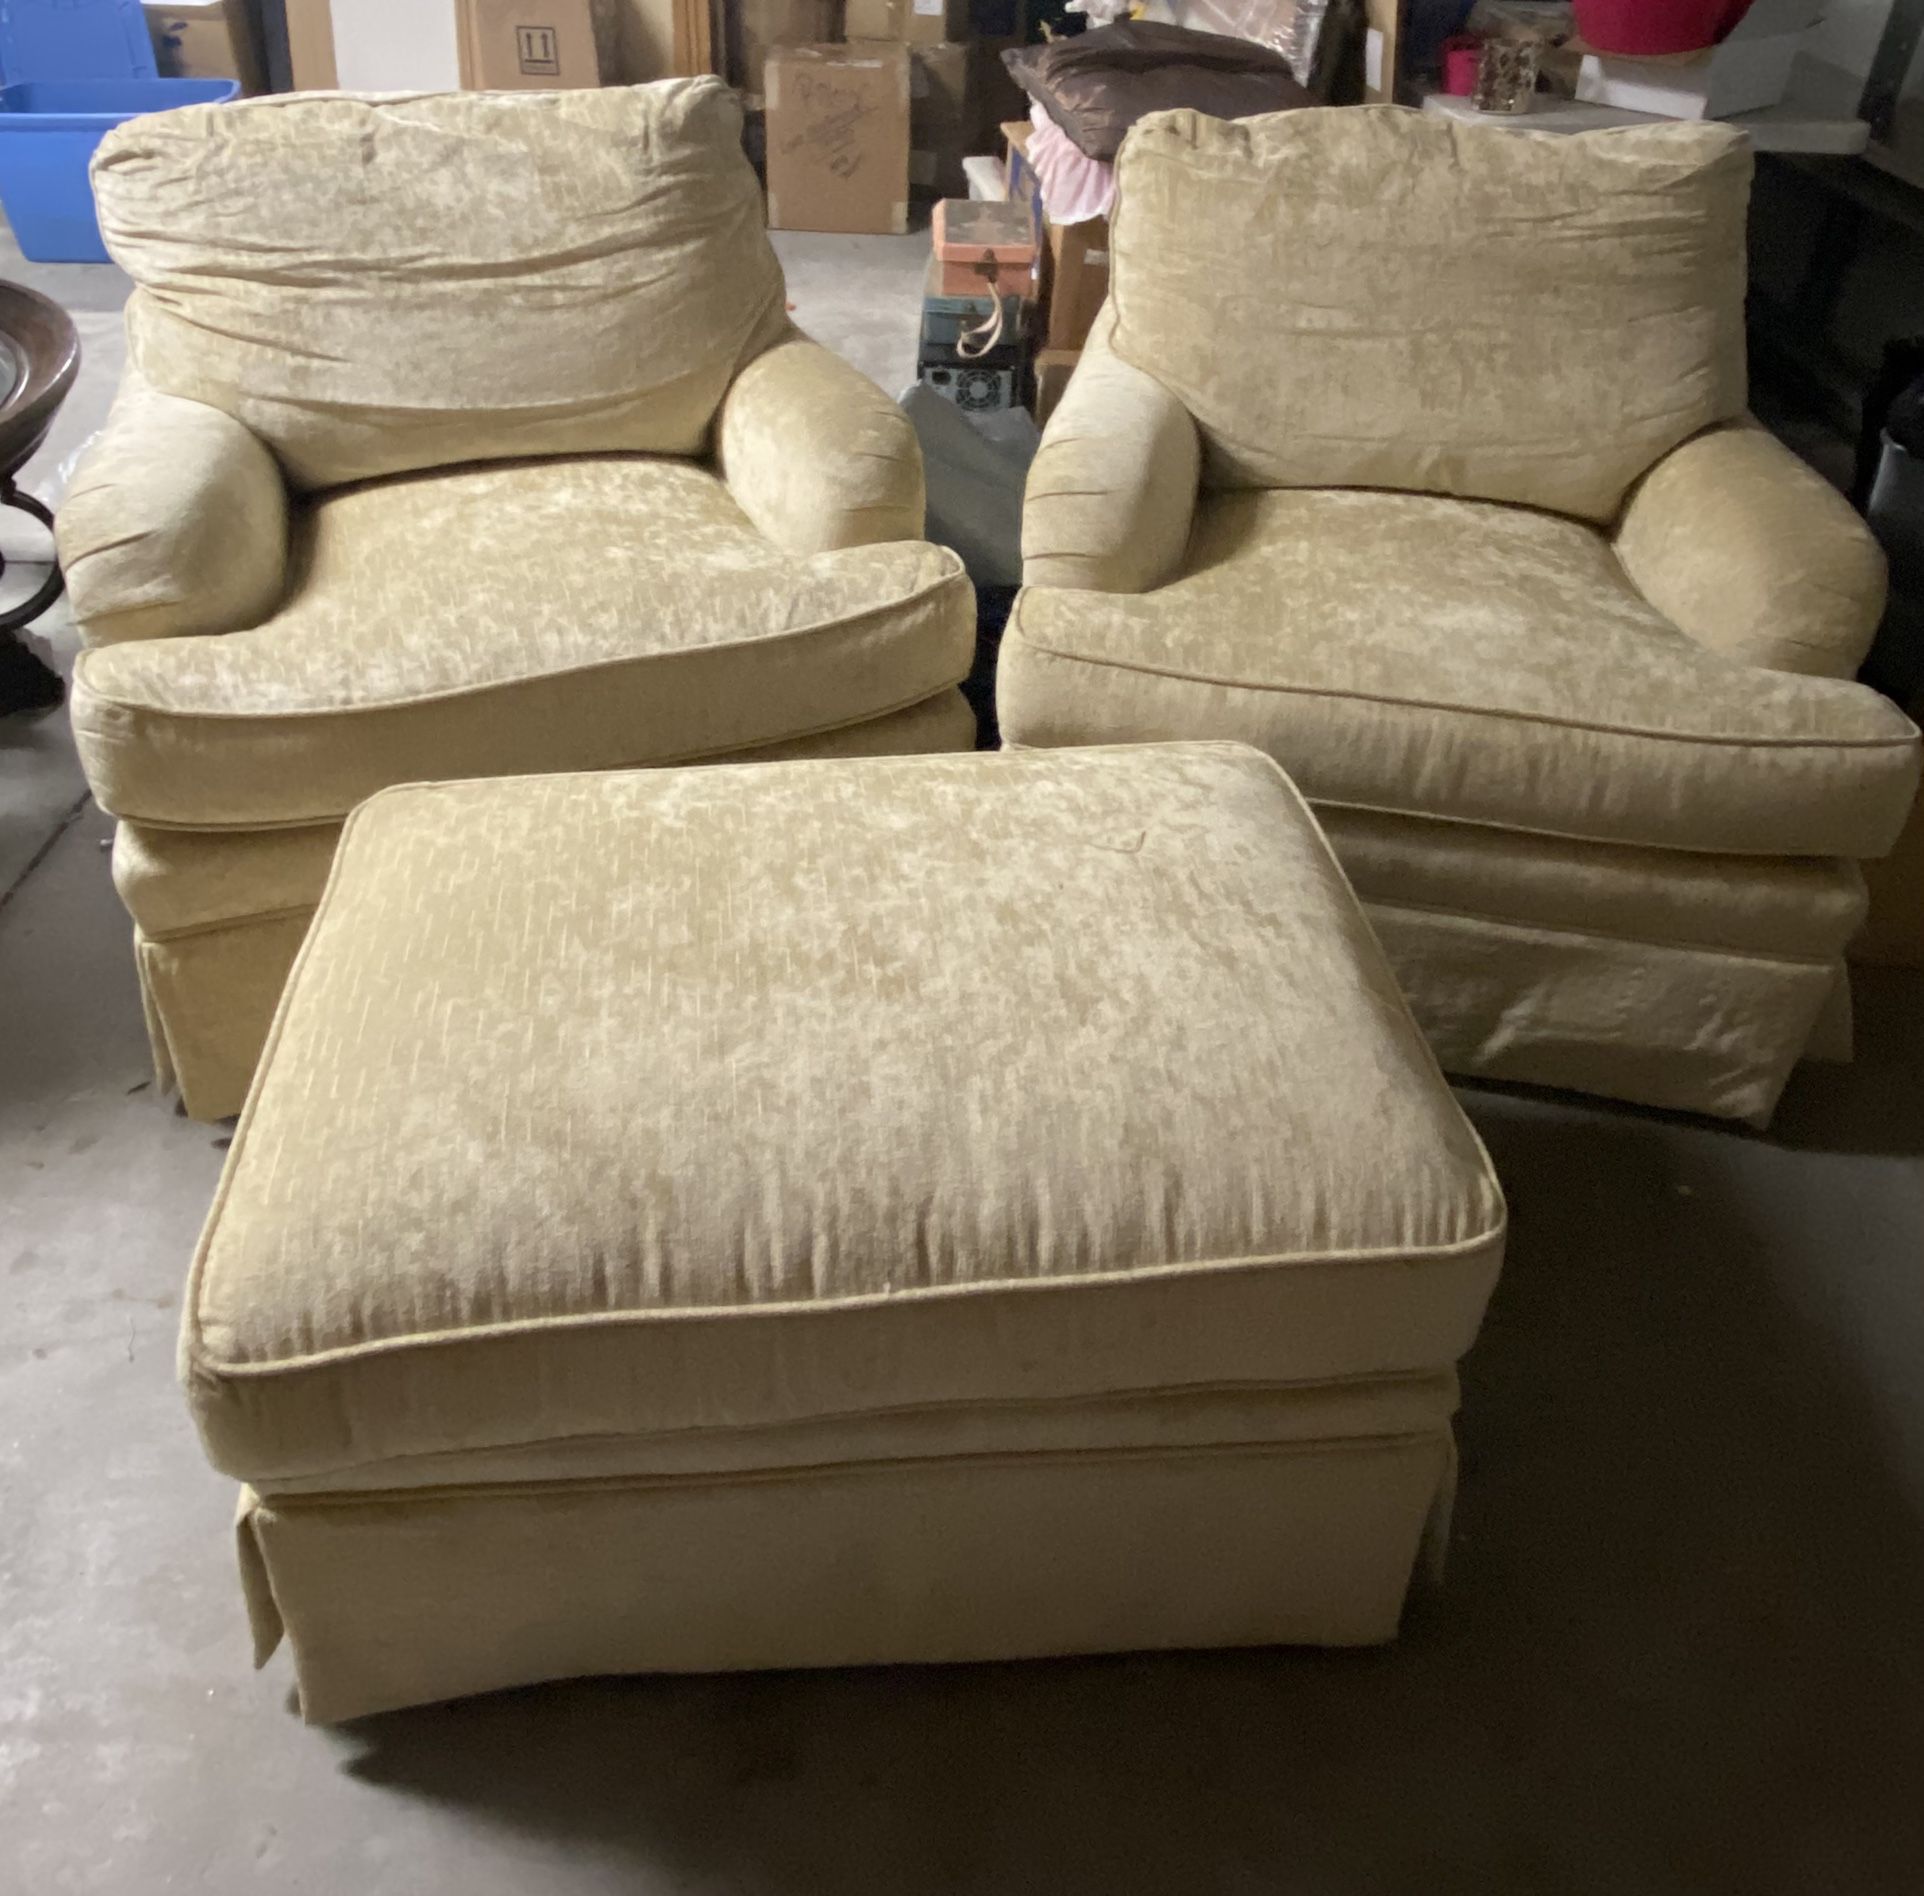 Two Swivel Chairs And An Ottoman